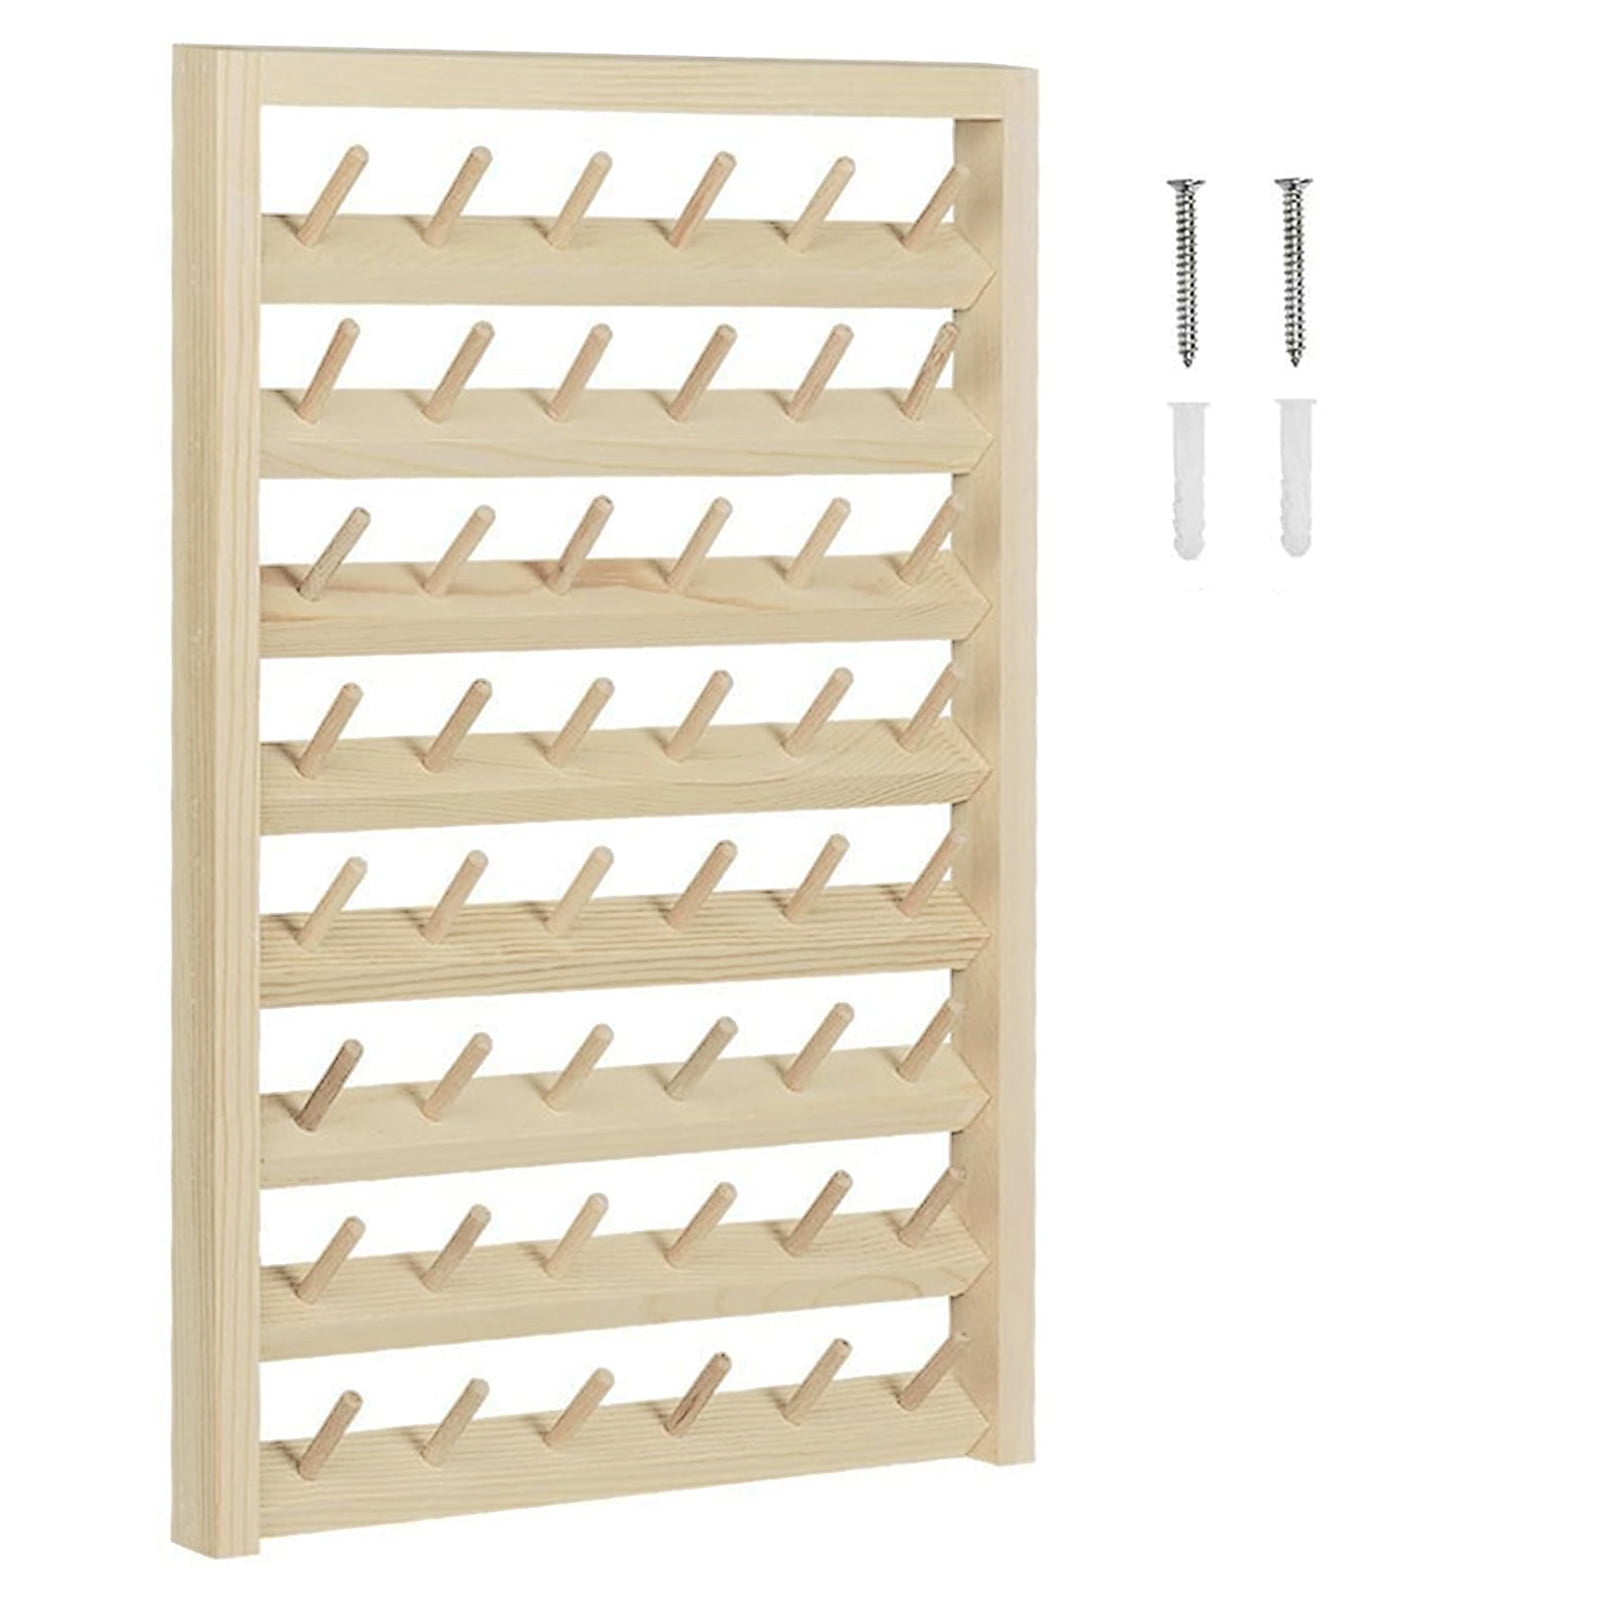 120 Spool Wood Thread Cone Holder Rack Organizer For Sewing Quilting 